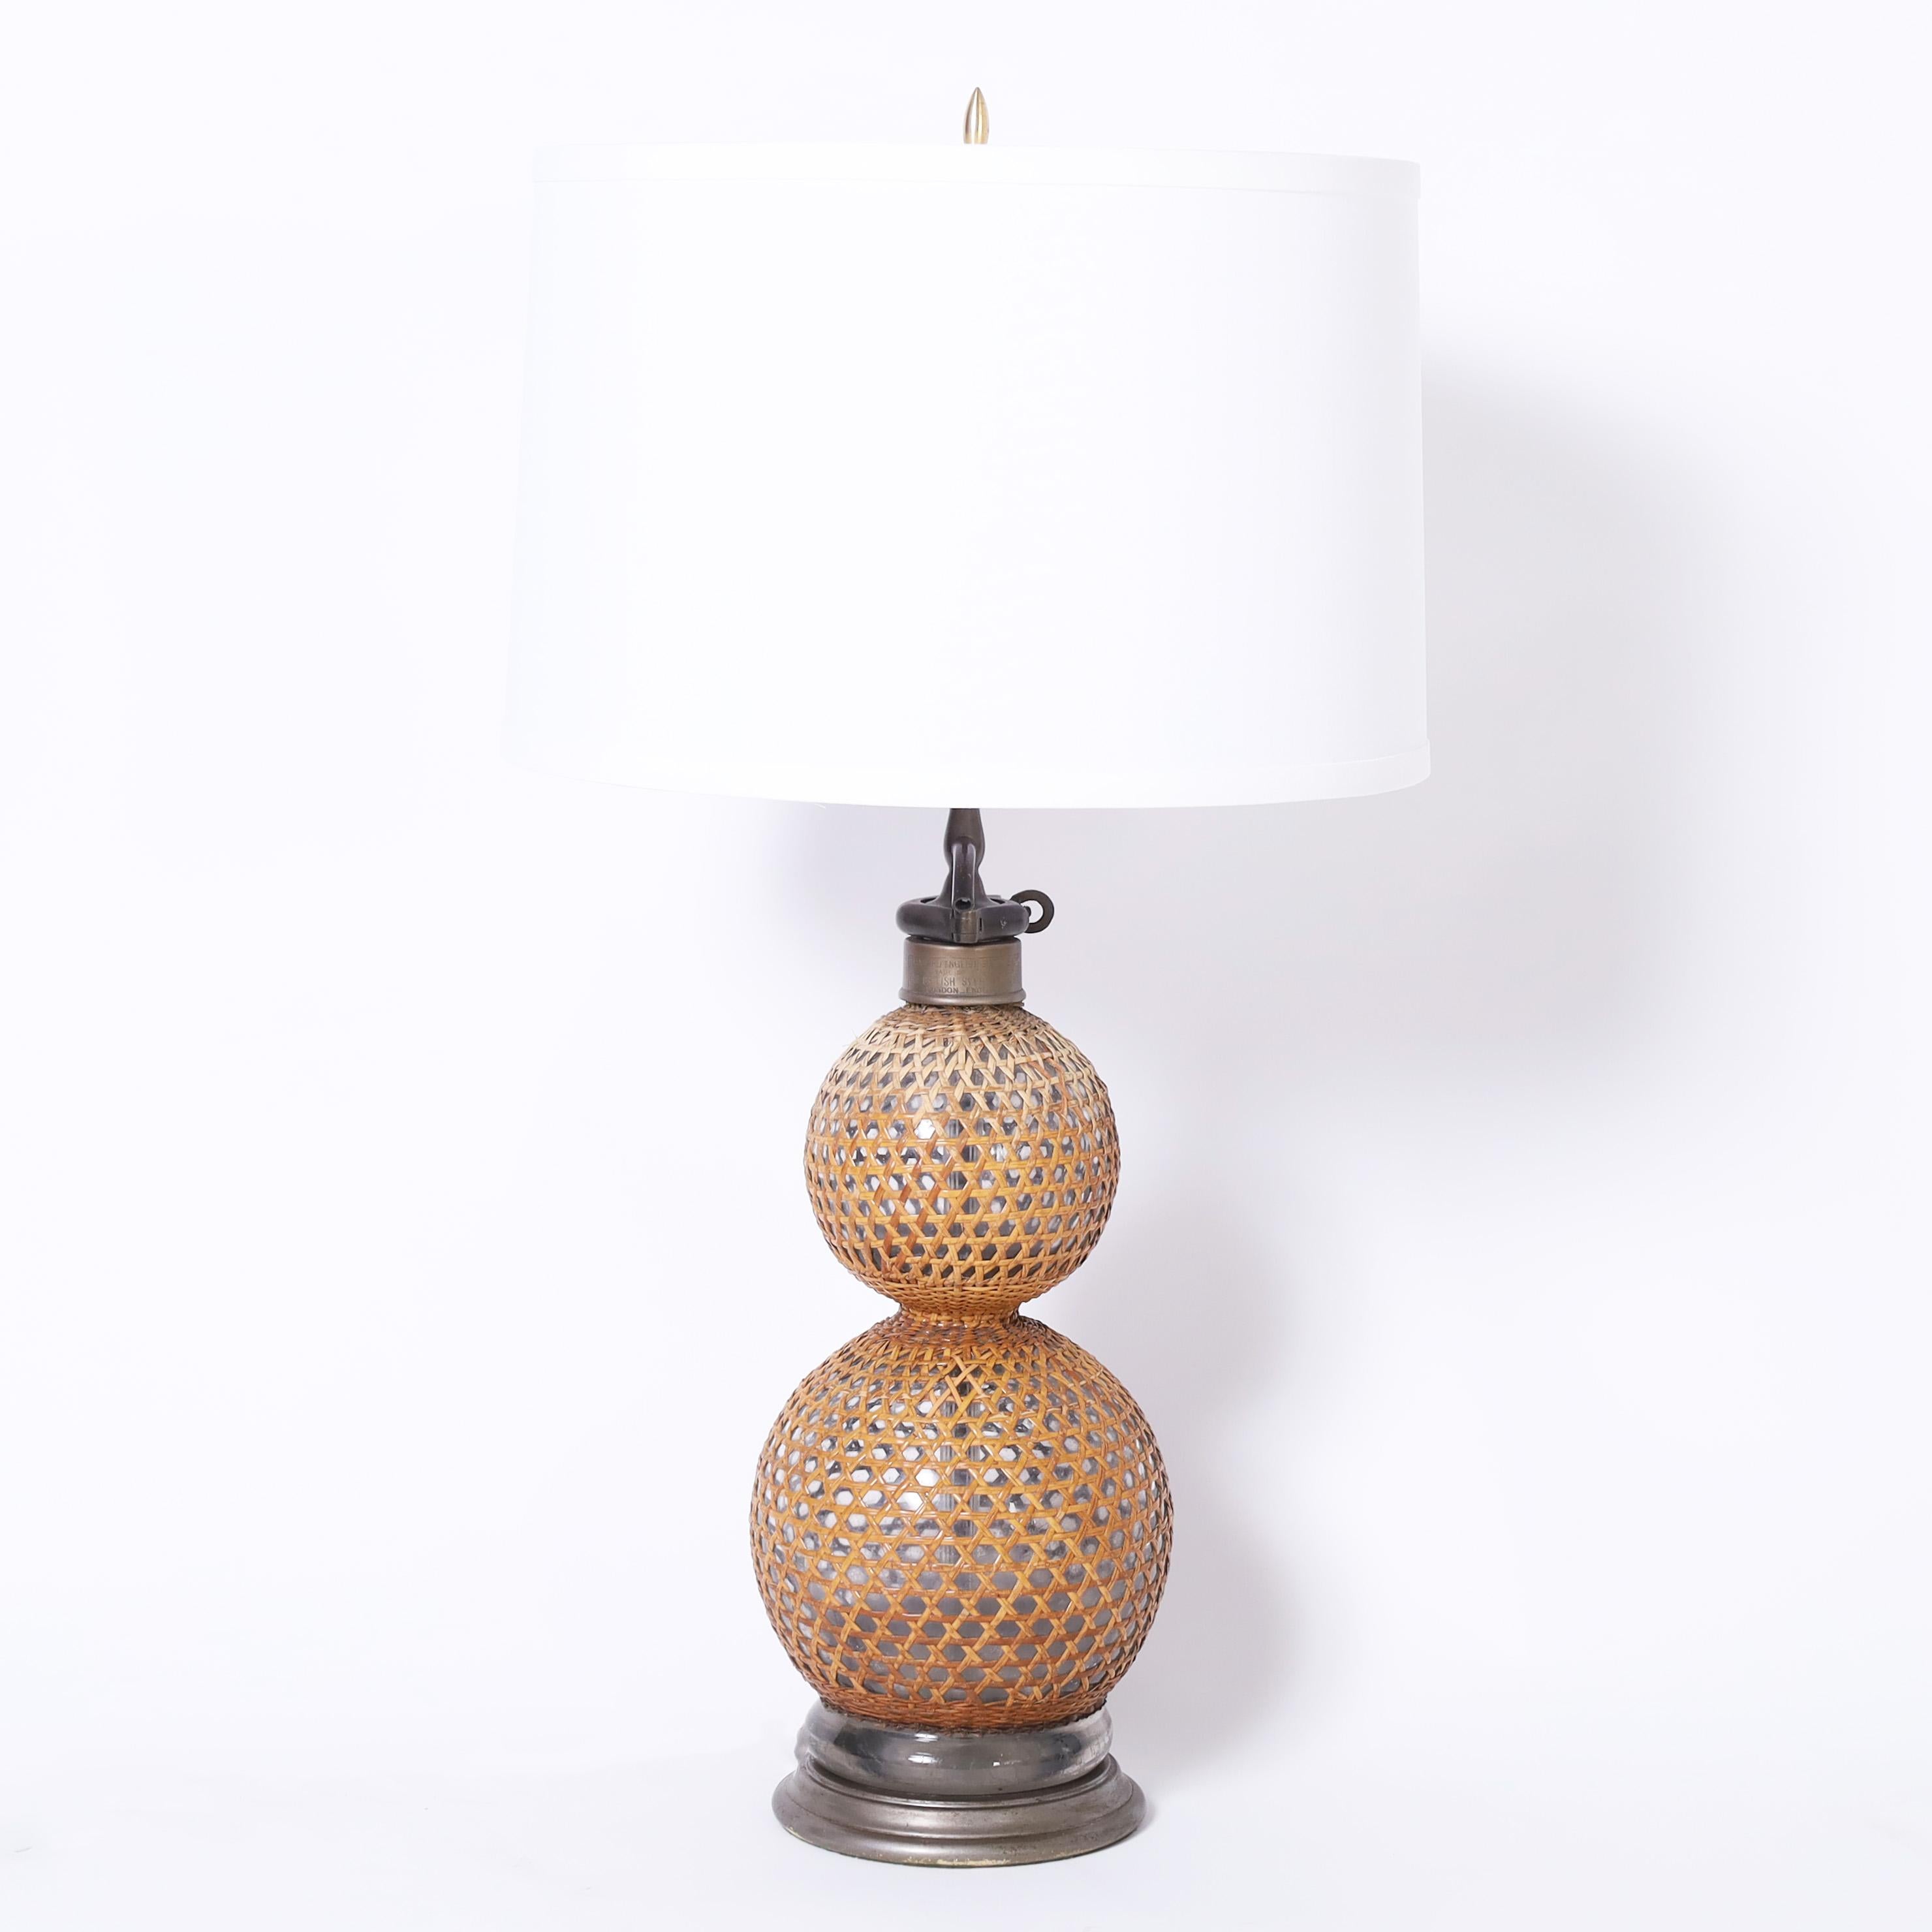 Vintage pair of English table lamps crafted in blown glass in a classic double bulb form wrapped in reed, once seltzer bottles now lamps with pewter hardware. 